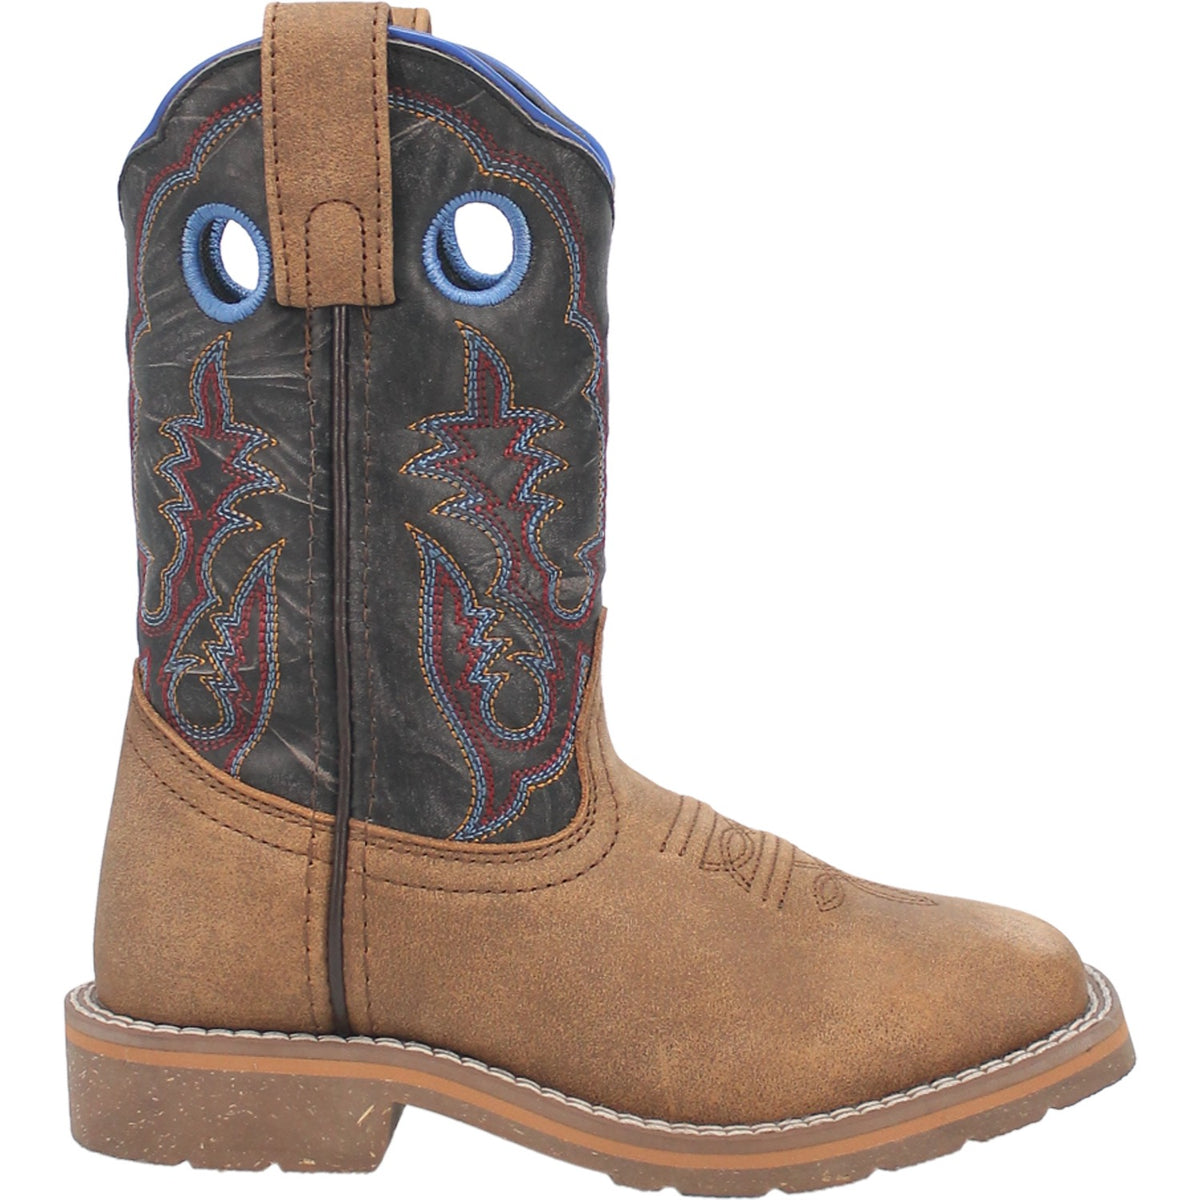 RYE LEATHER CHILDREN'S BOOT Image